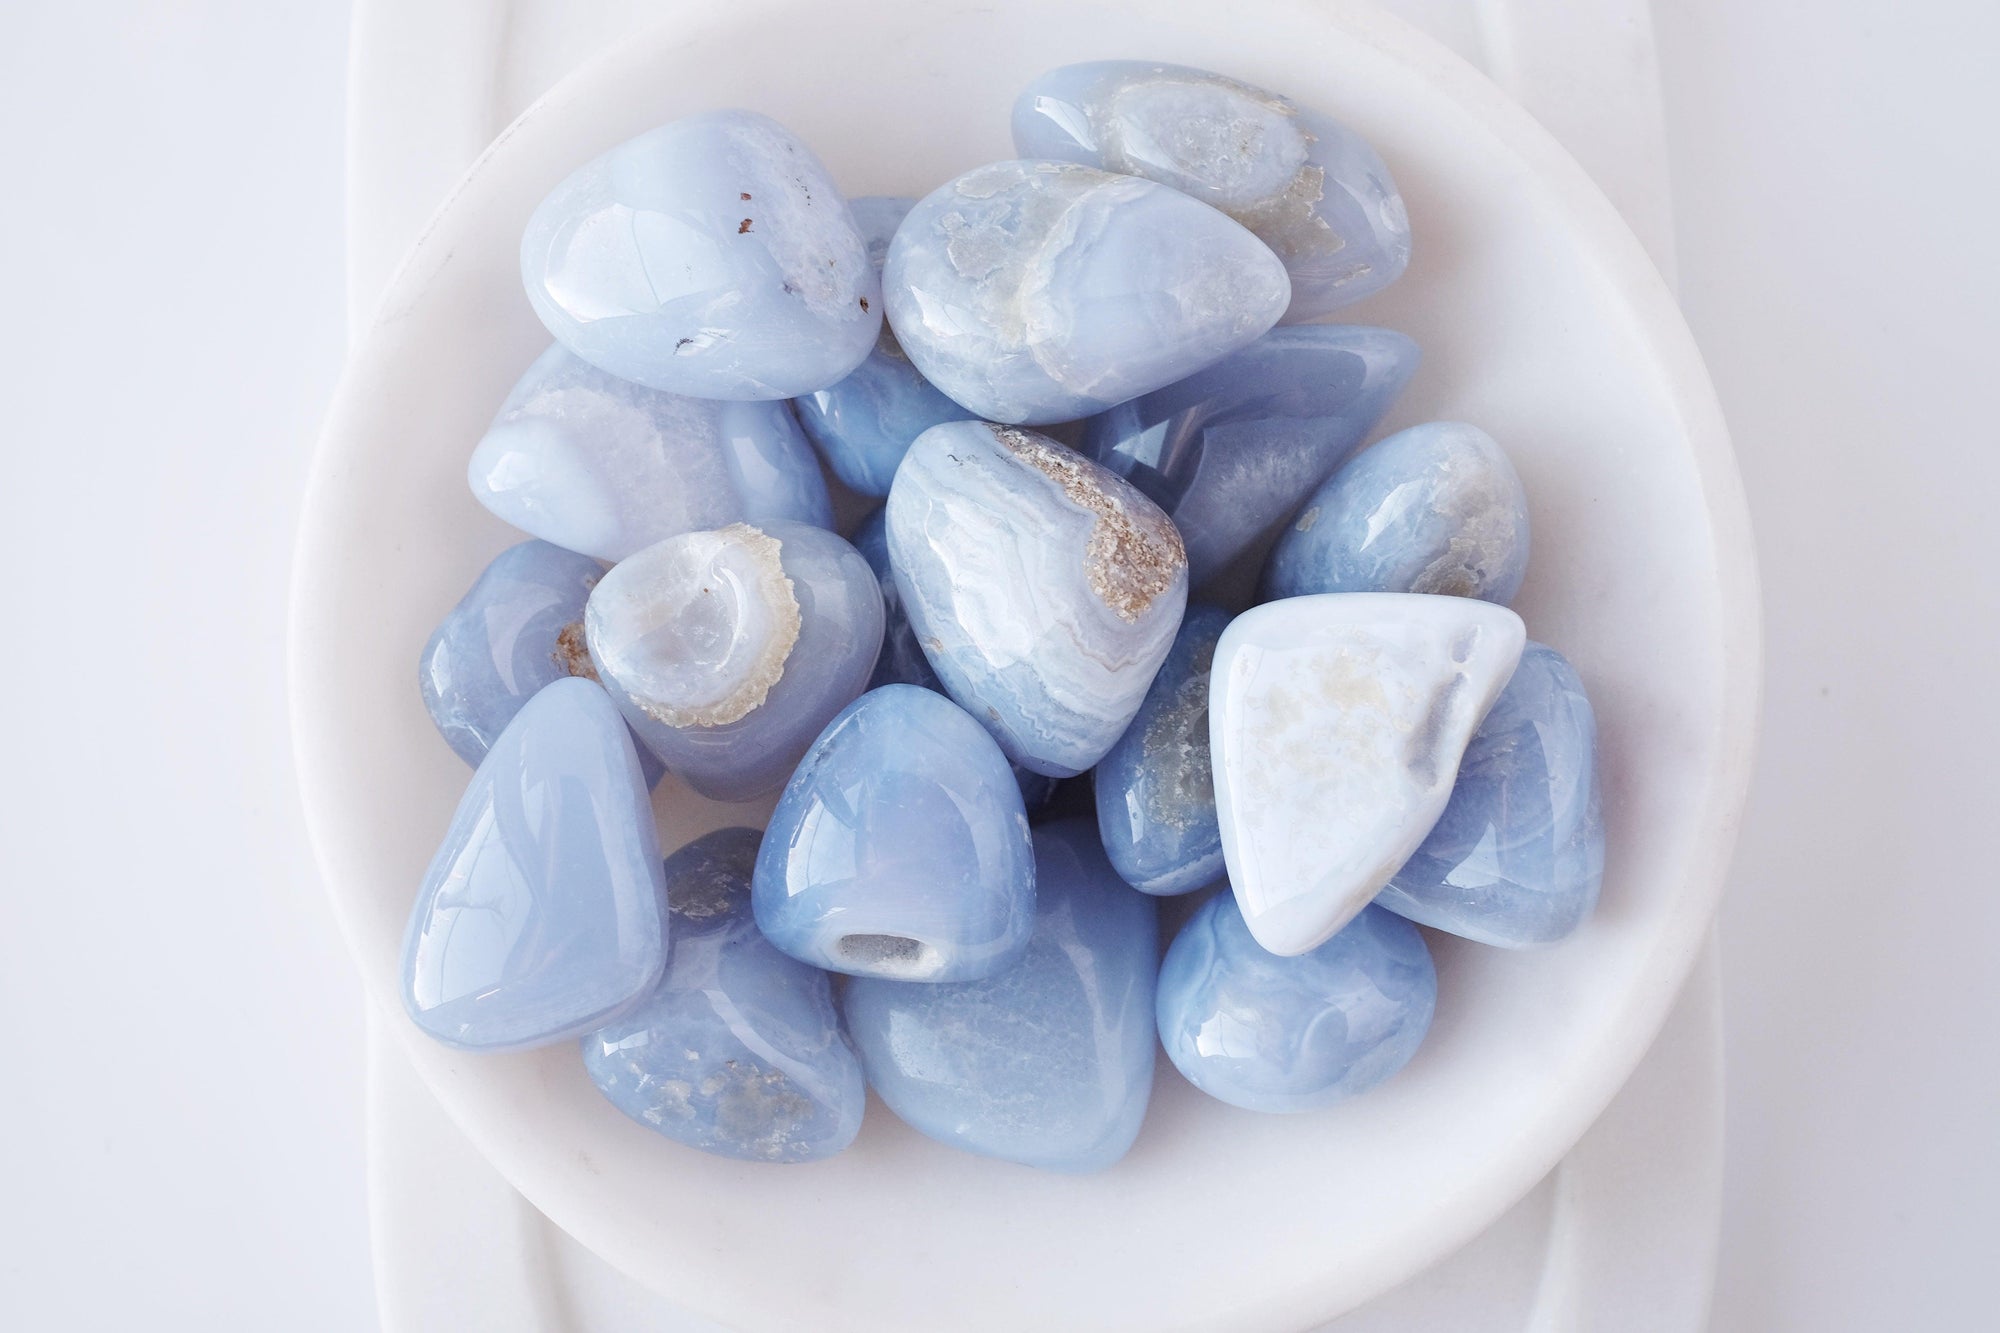 Blue Lace Agate Tumbled Stone - Catalyst & Co